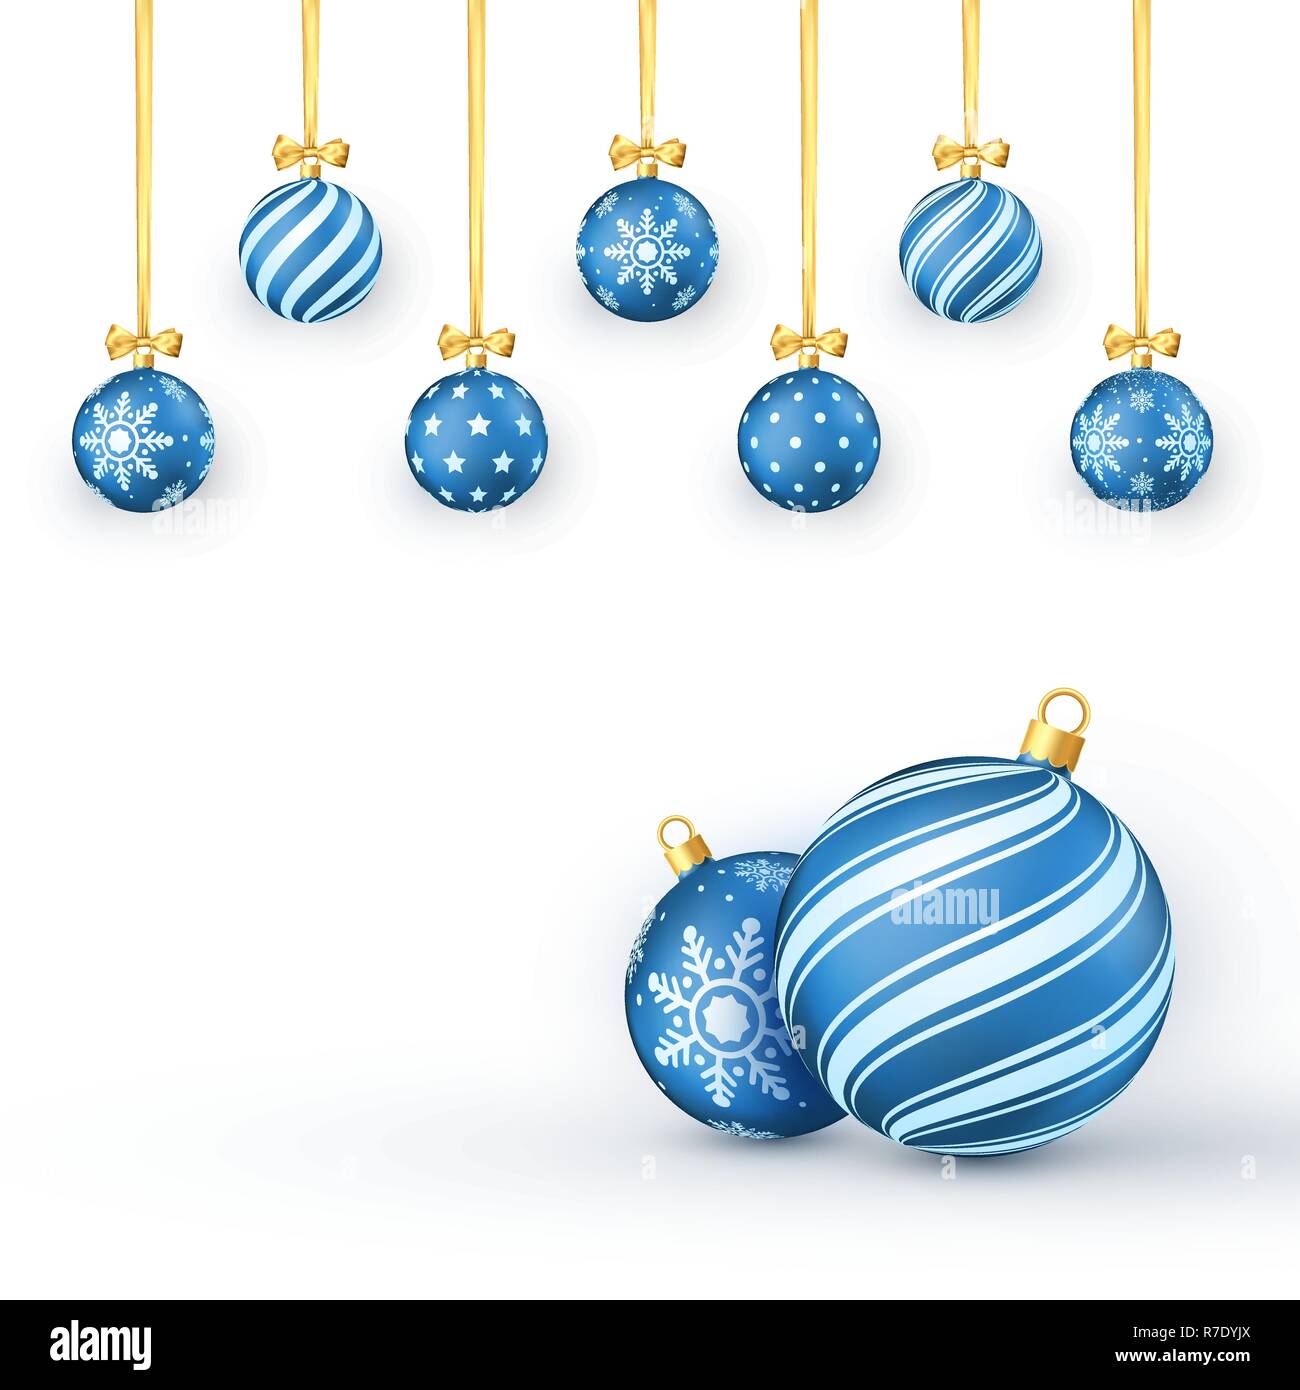 New Year background with blue Christmas balls golden ribbons and bows. Vector illustration Stock Vector